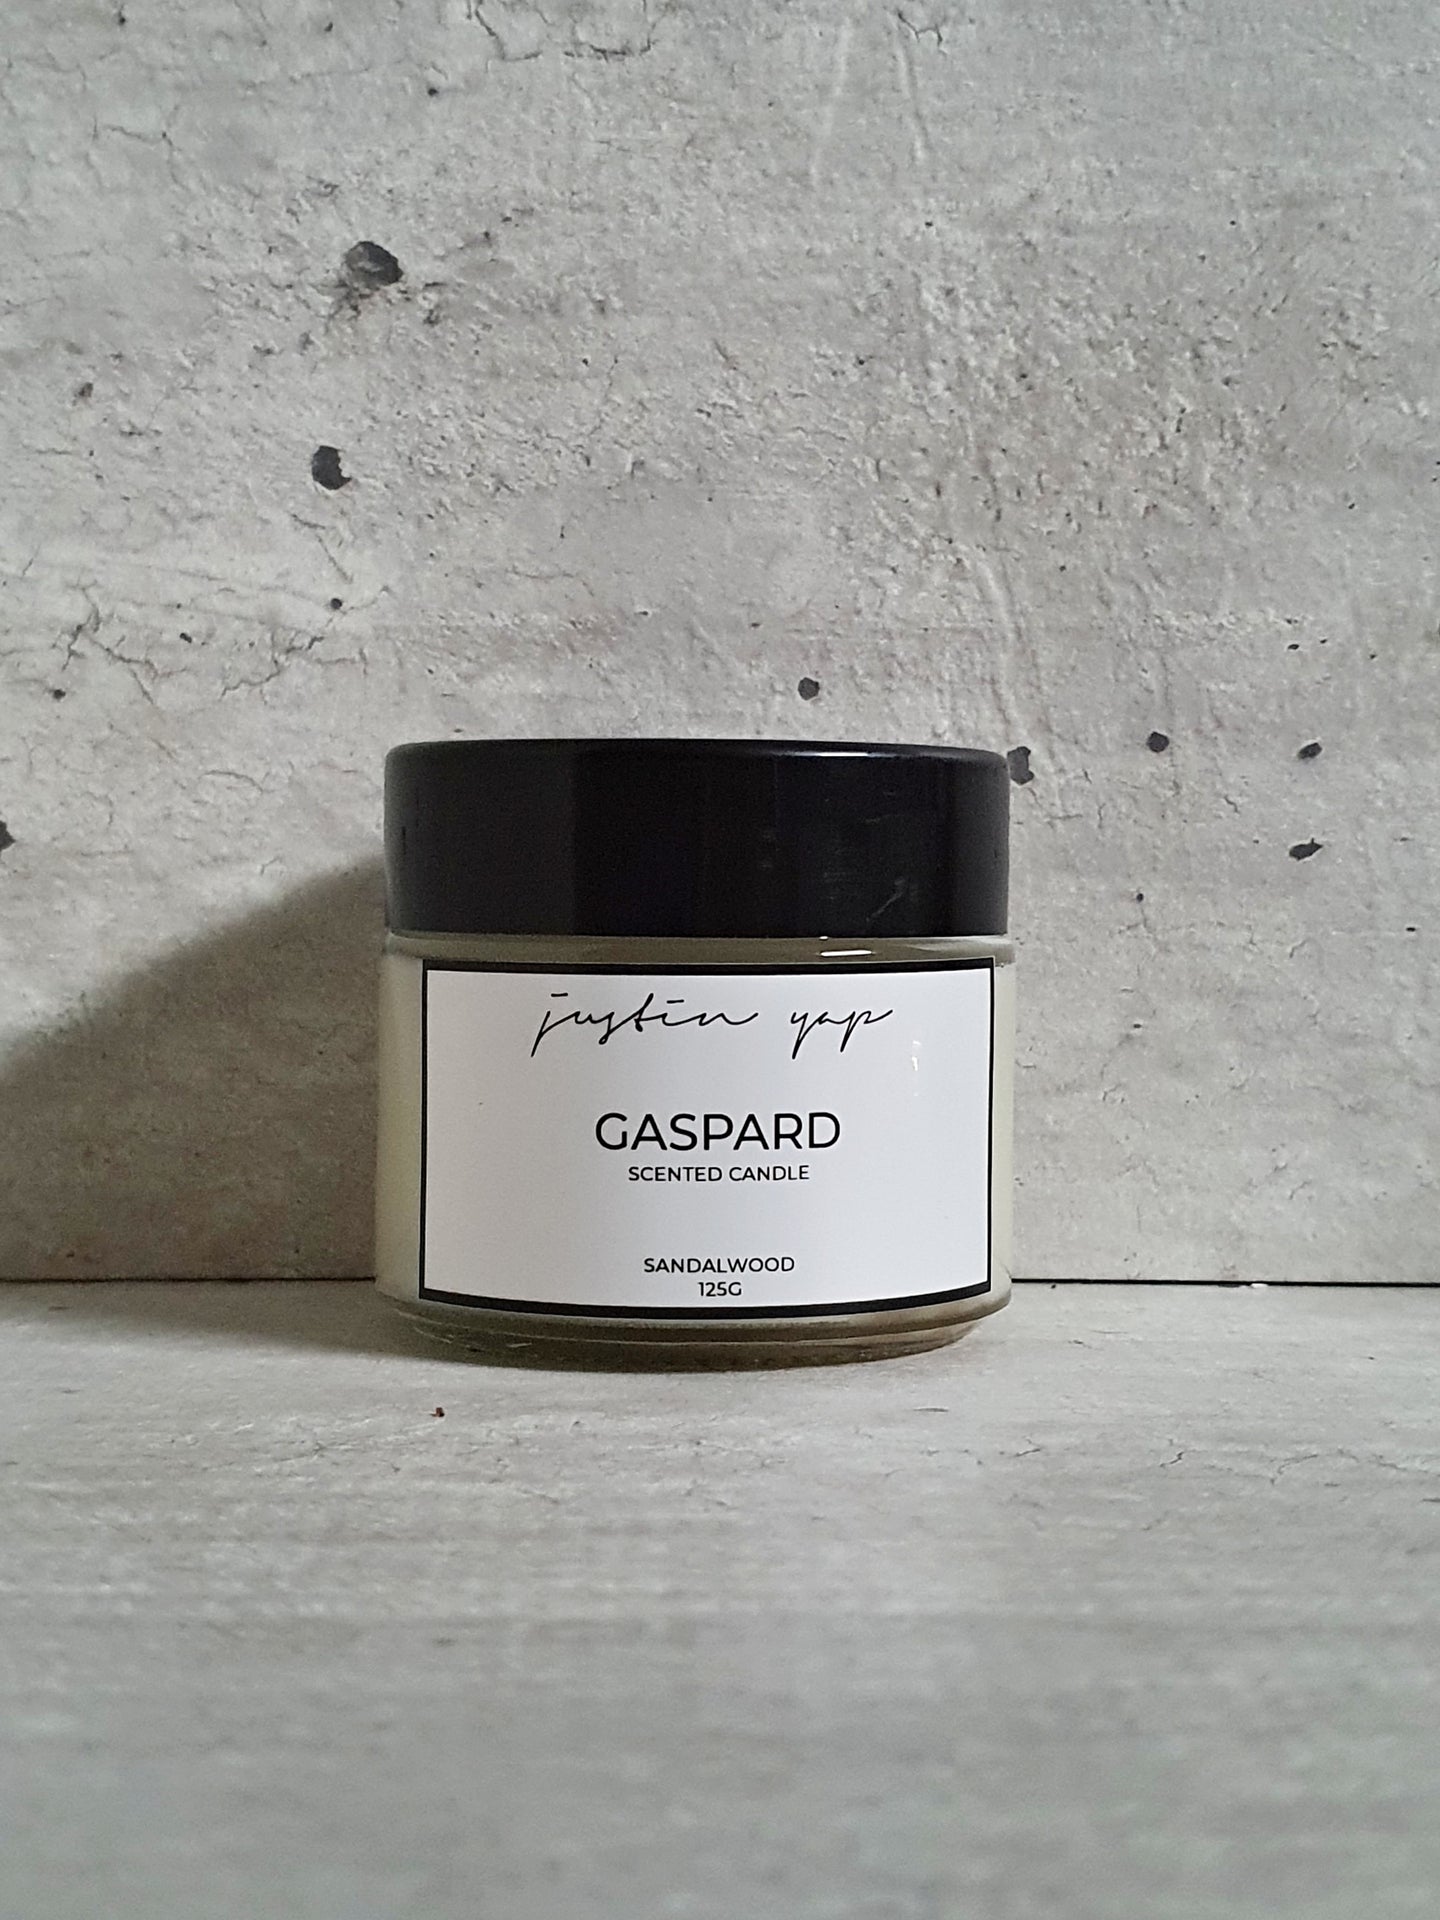 Gaspard Scented Candle - Sandalwood